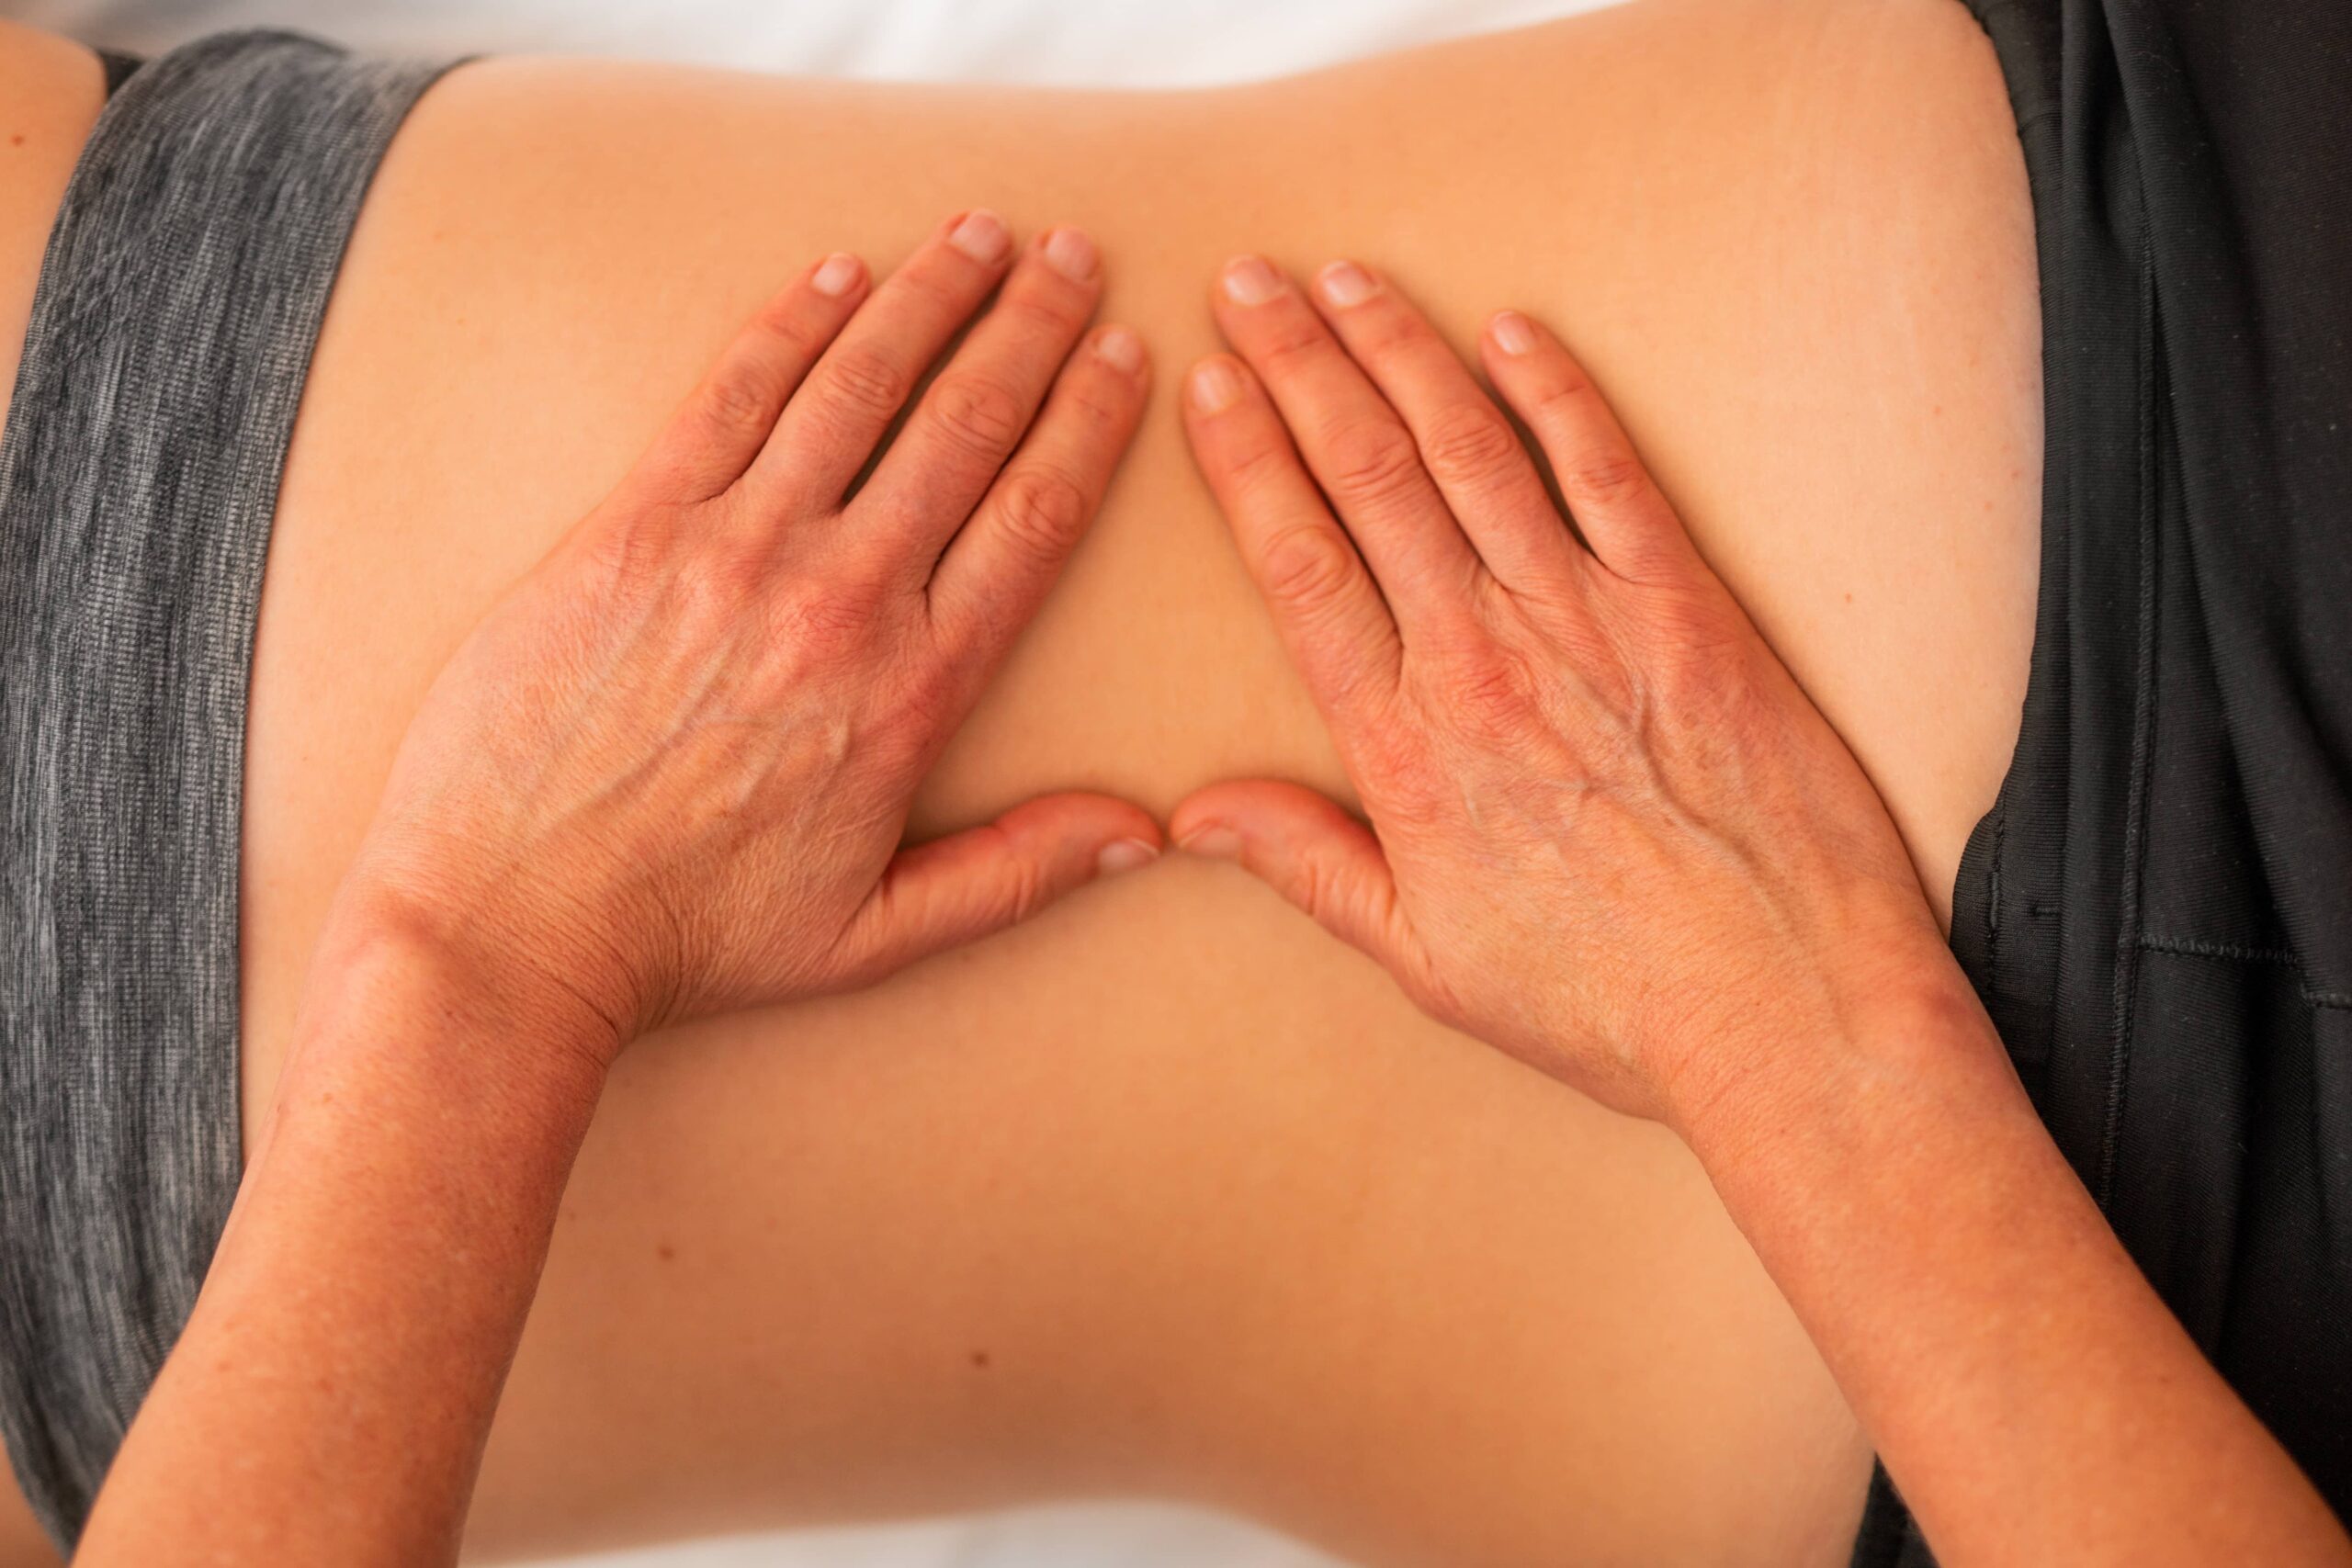 Asian Massage vs Western Massage: What Are the Differences?